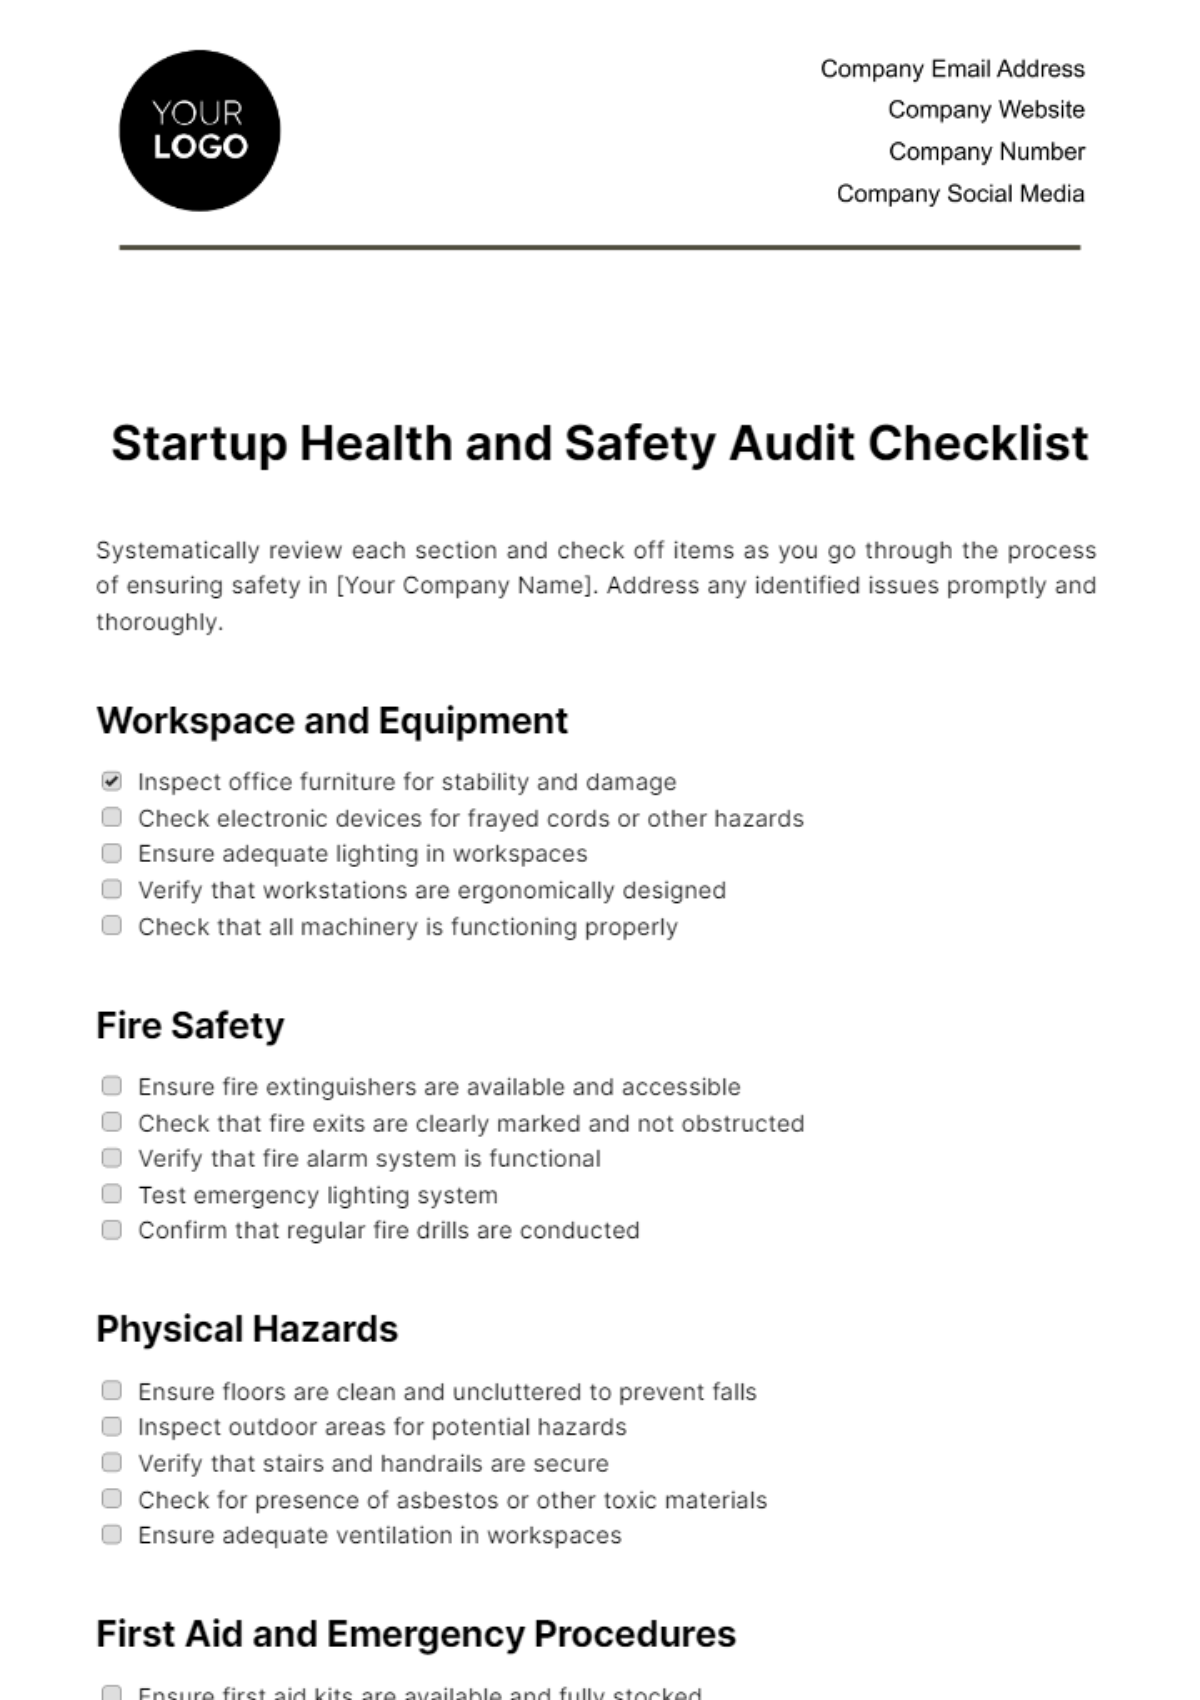 Startup Health and Safety Audit Checklist Template